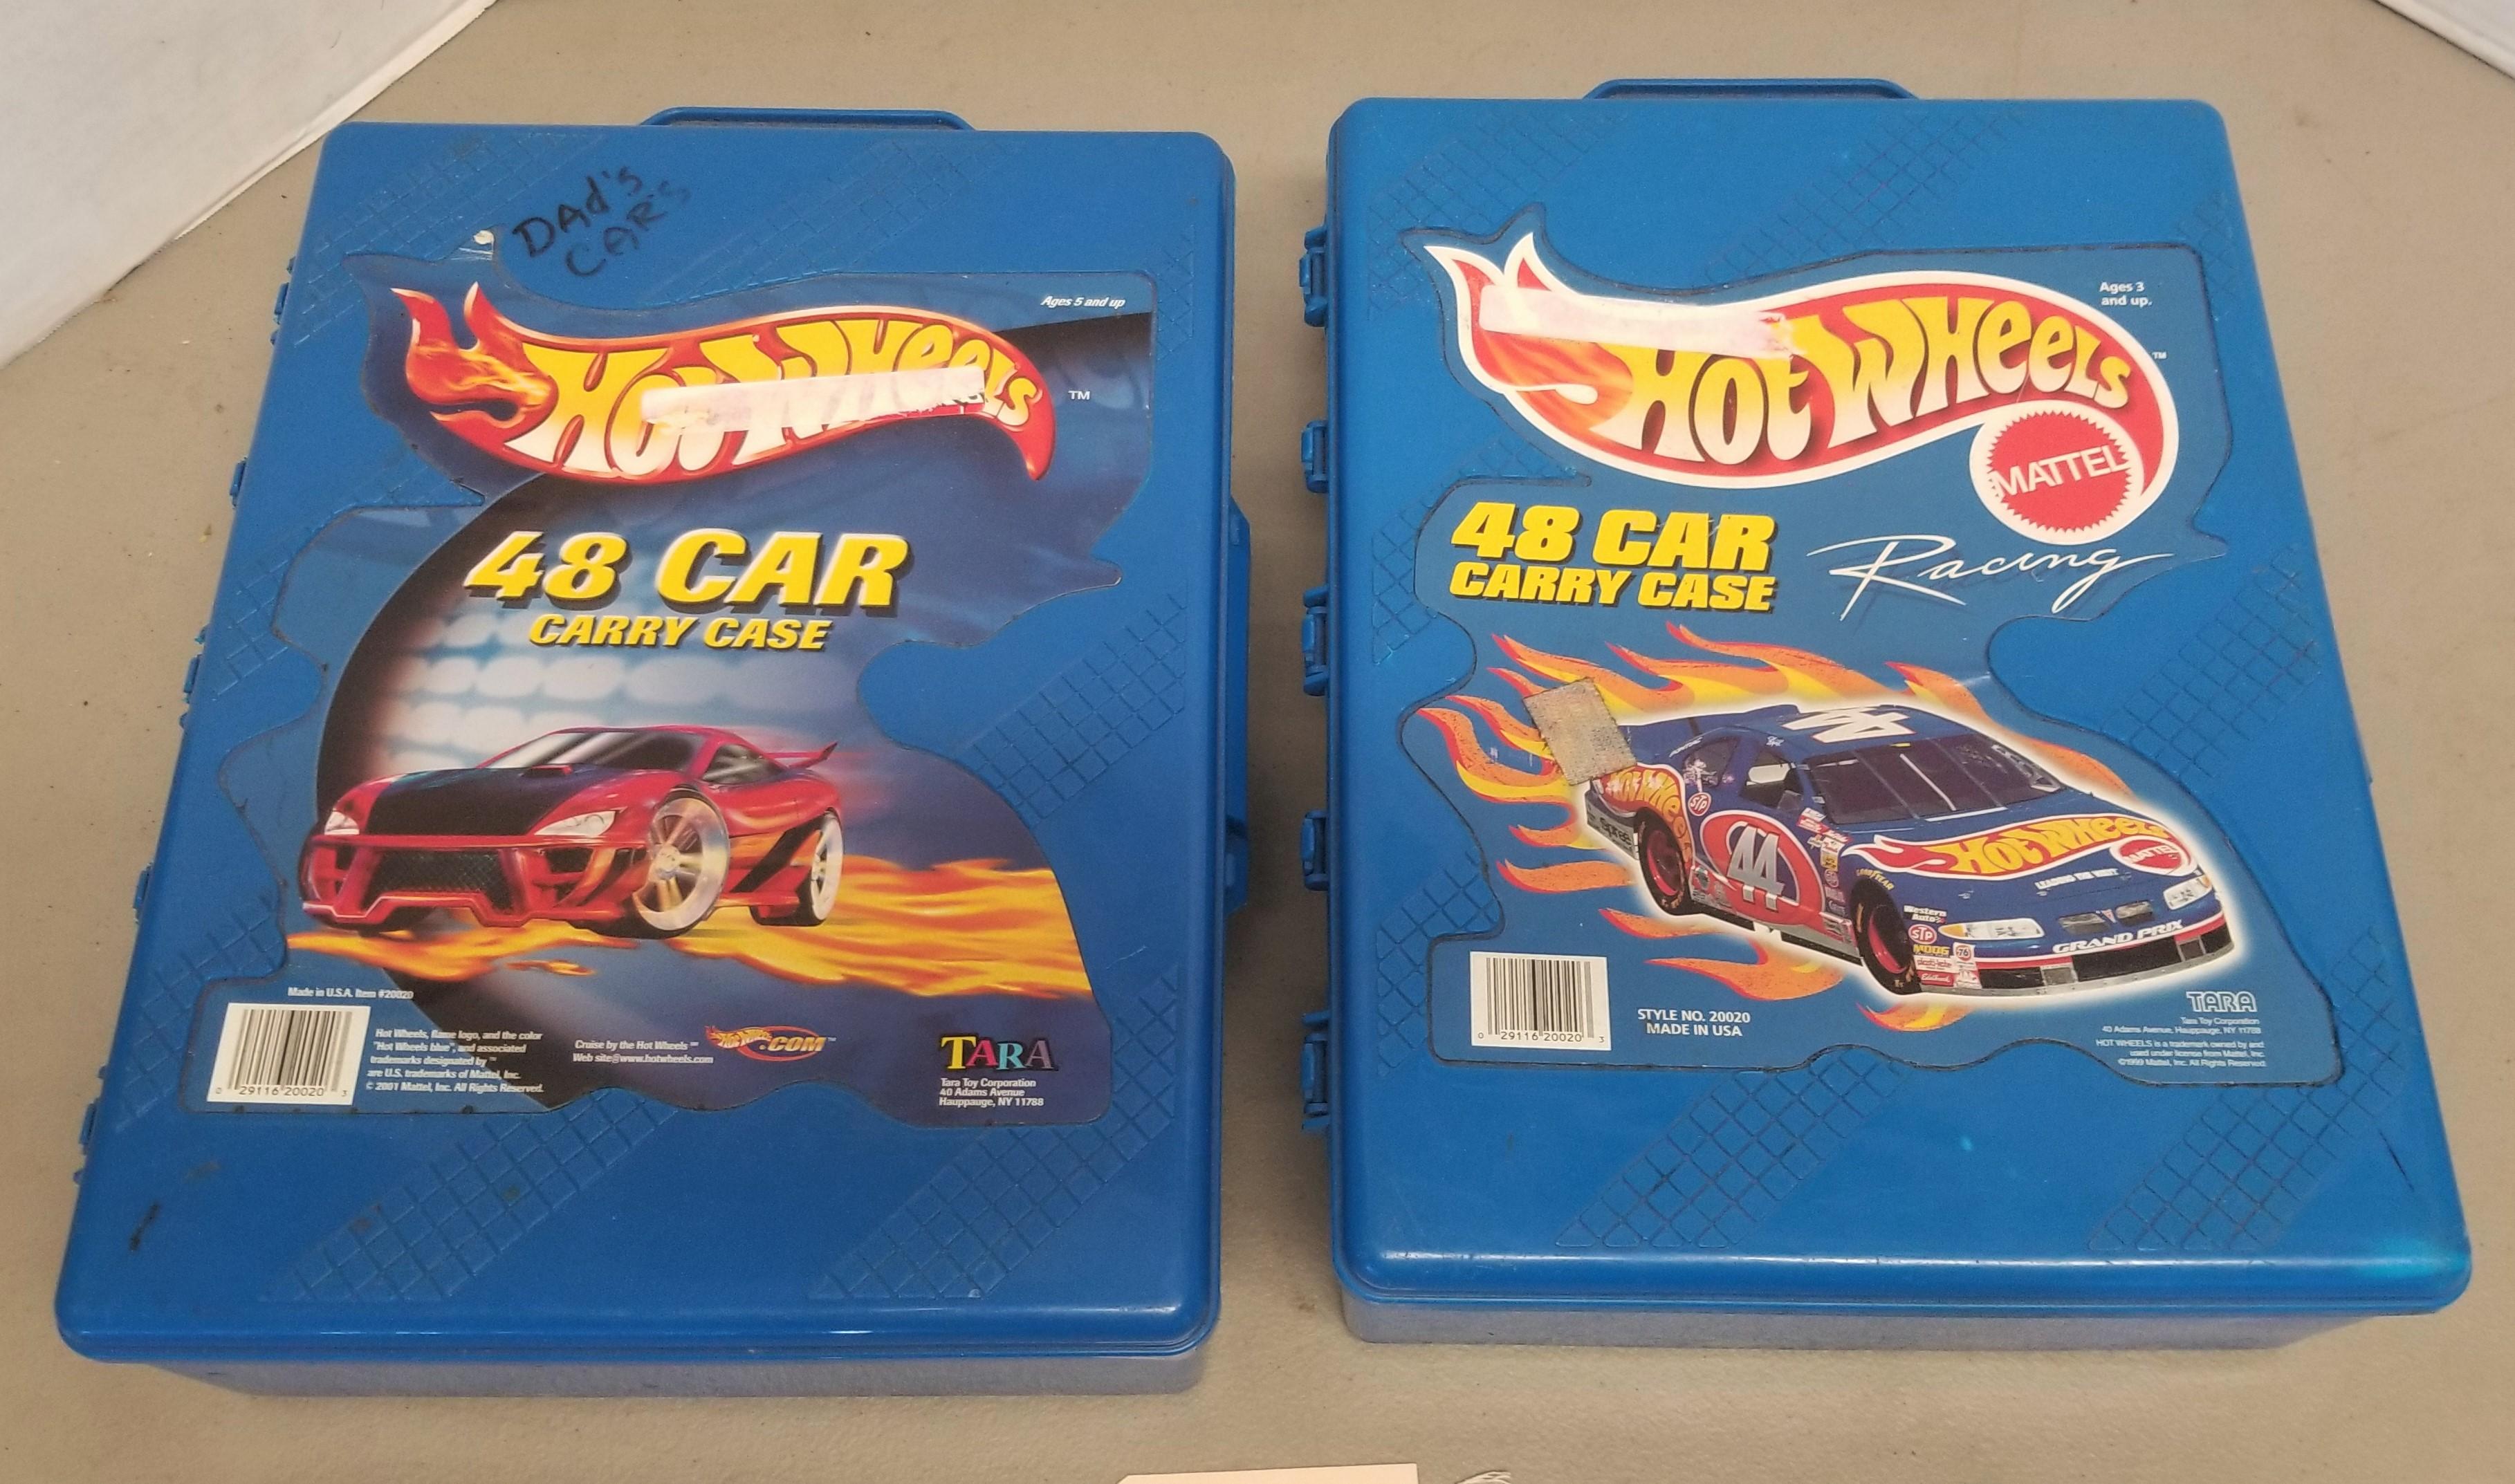 2 Vintage Hot Wheels Cases with cars,